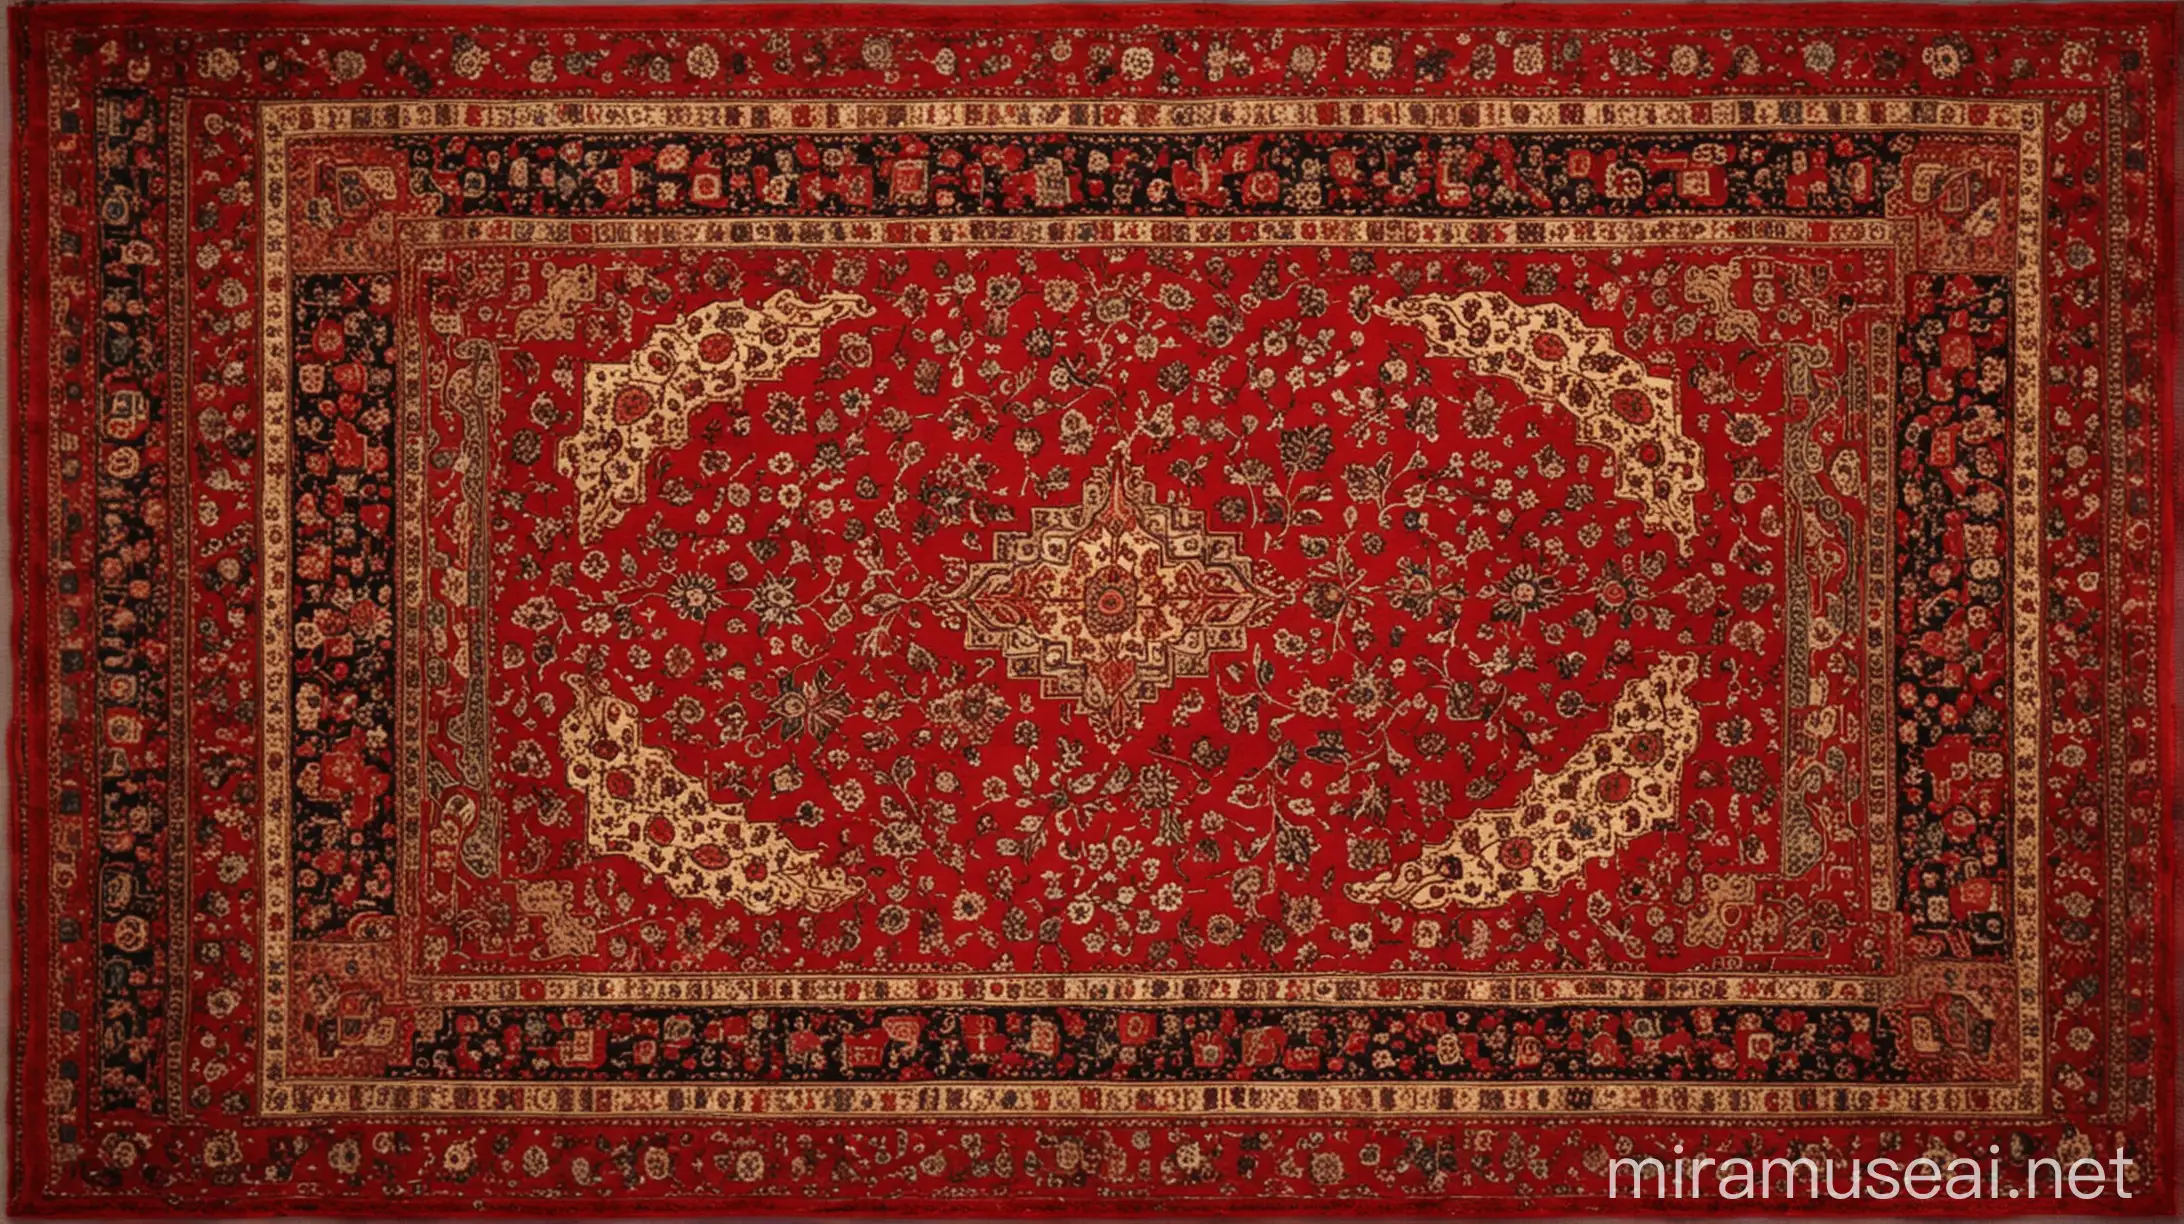 Get The picture  or image of beautiful and special Carpet or rug with red color for youtube banner with 2048 × 1152 pixels